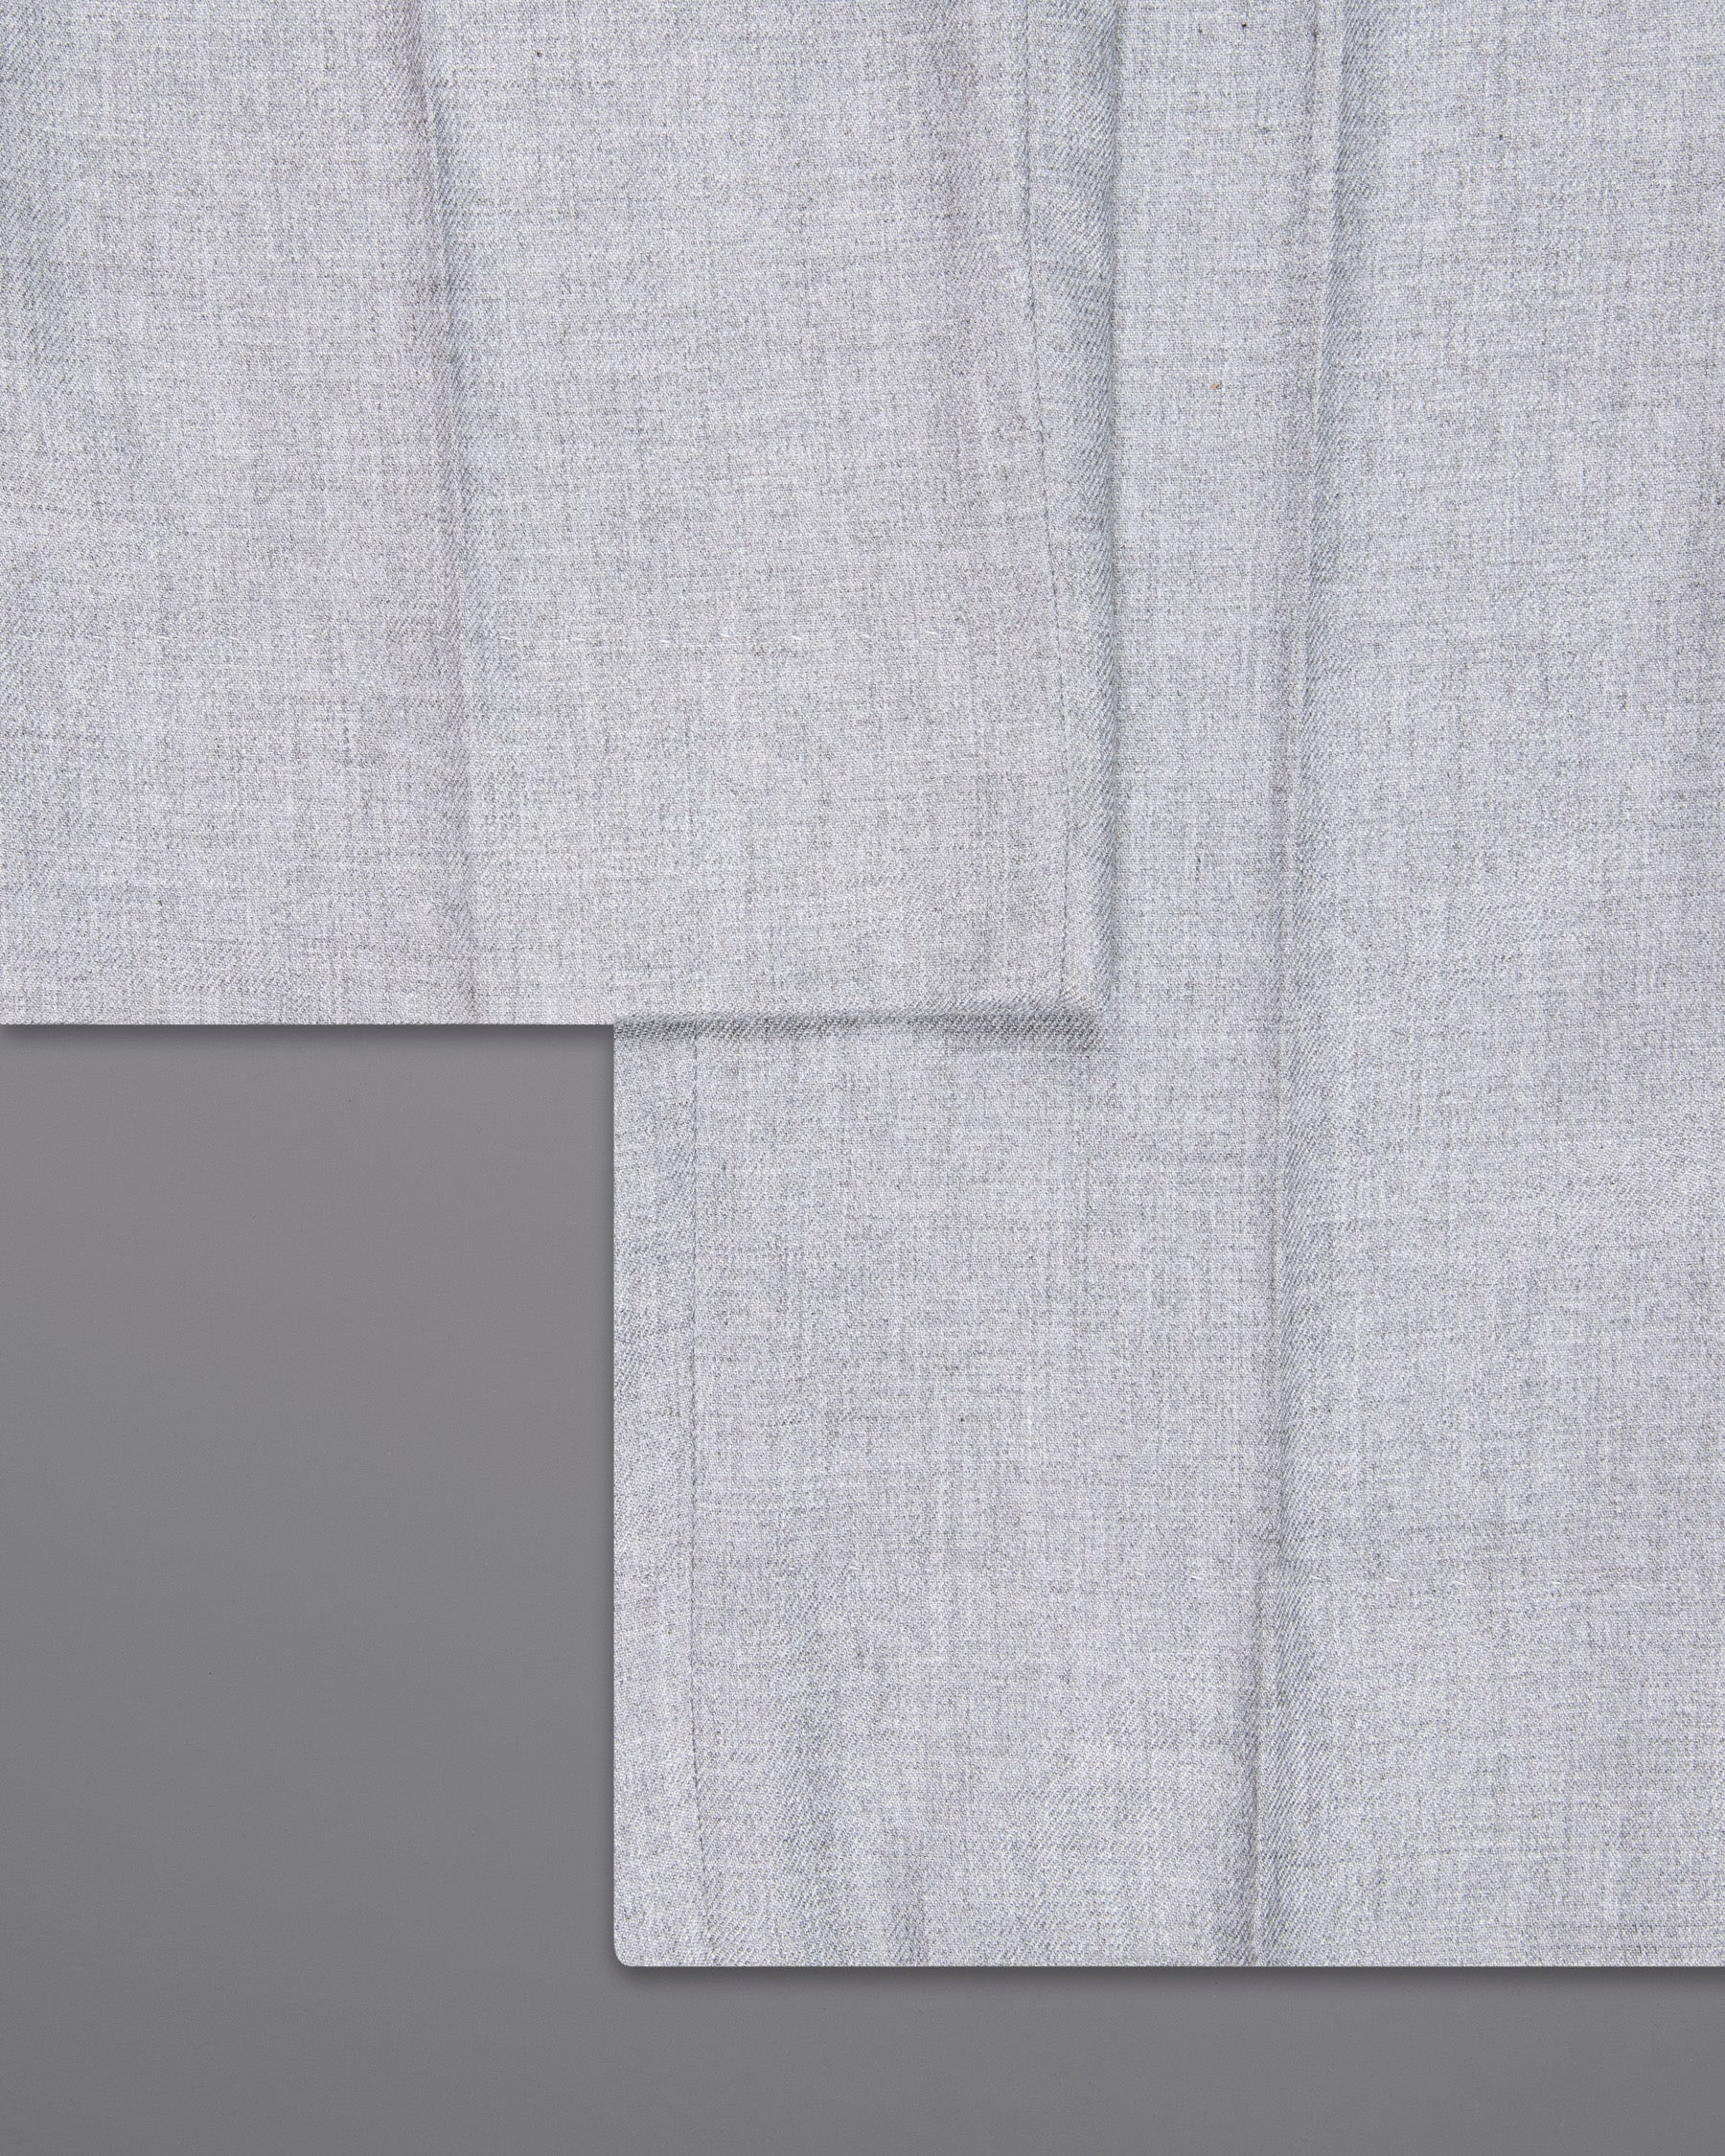 Link Water Grey DouSTe-Breasted Wool Rich Suit ST1302-DB-36, ST1302-DB-38, ST1302-DB-40, ST1302-DB-42, ST1302-DB-44, ST1302-DB-46, ST1302-DB-48, ST1302-DB-50, ST1302-DB-52, ST1302-DB-54, ST1302-DB-56, ST1302-DB-58, ST1302-DB-60